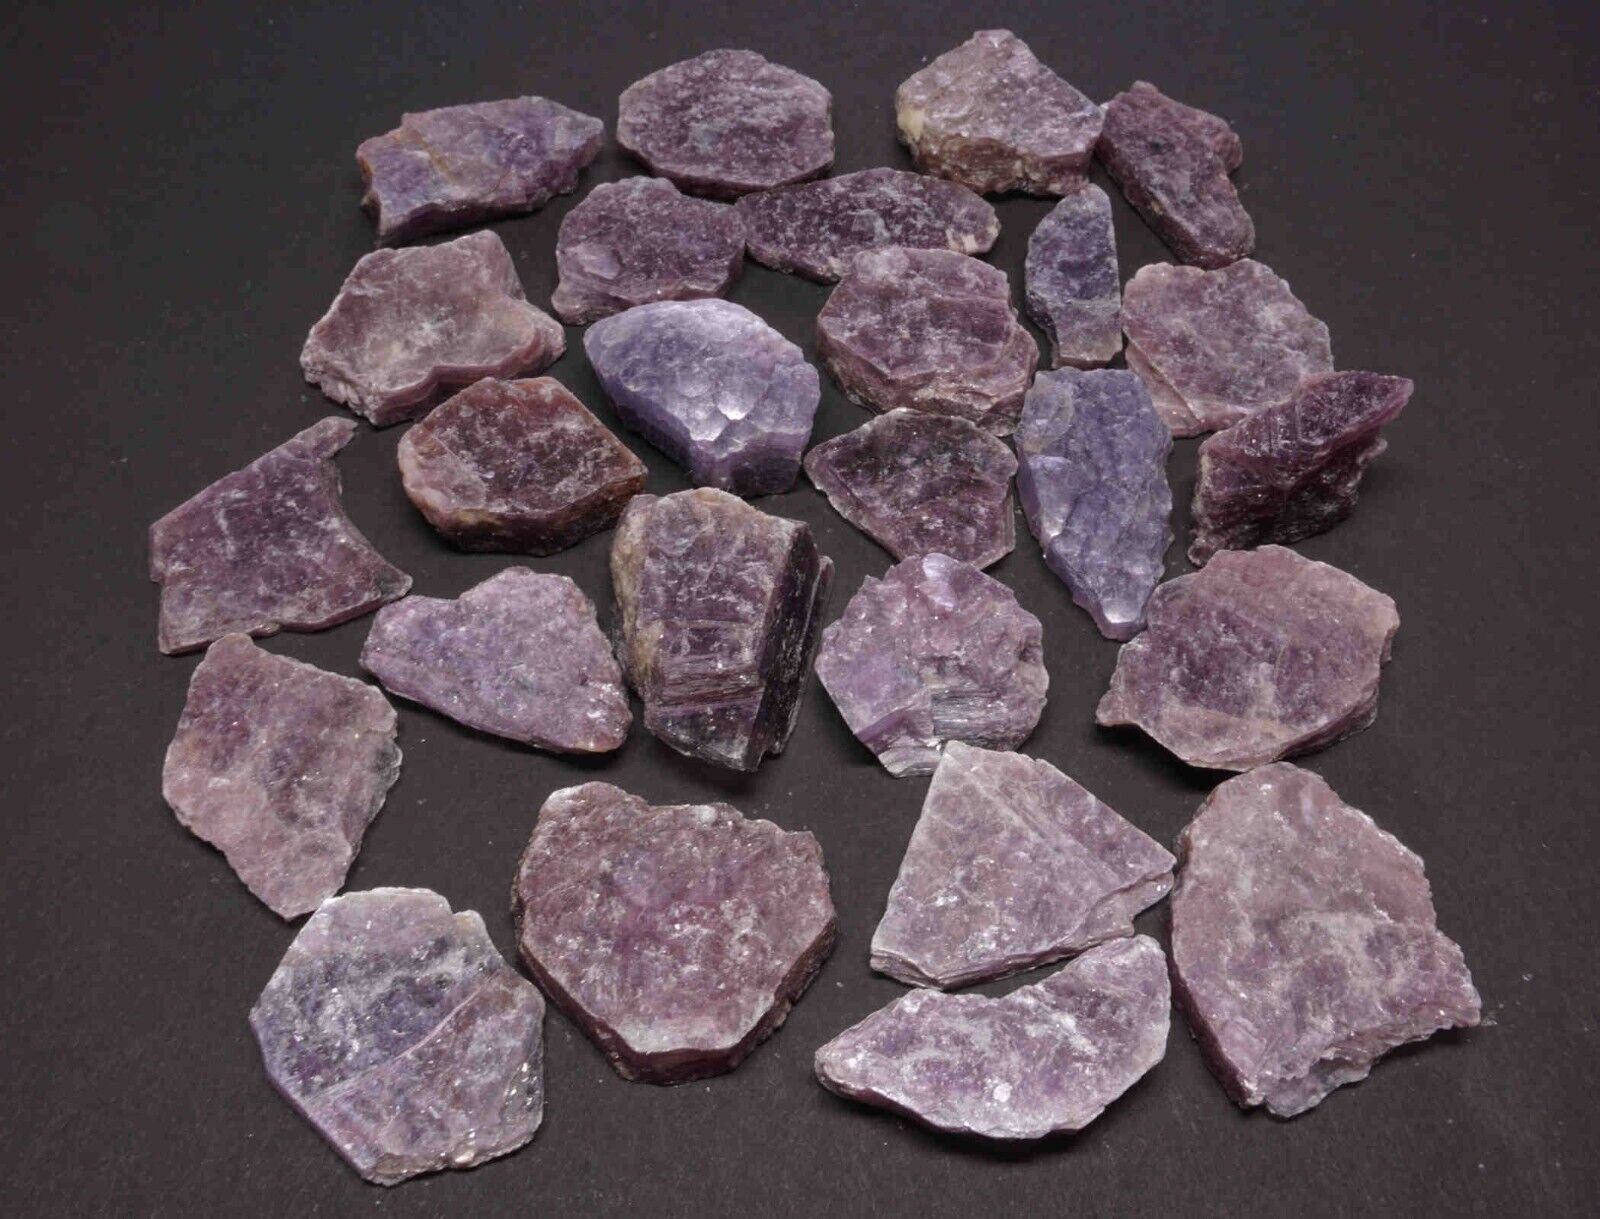 Lepidolite Collection Small 1/2 LB Layered Lavender Lithium Mica Crystals